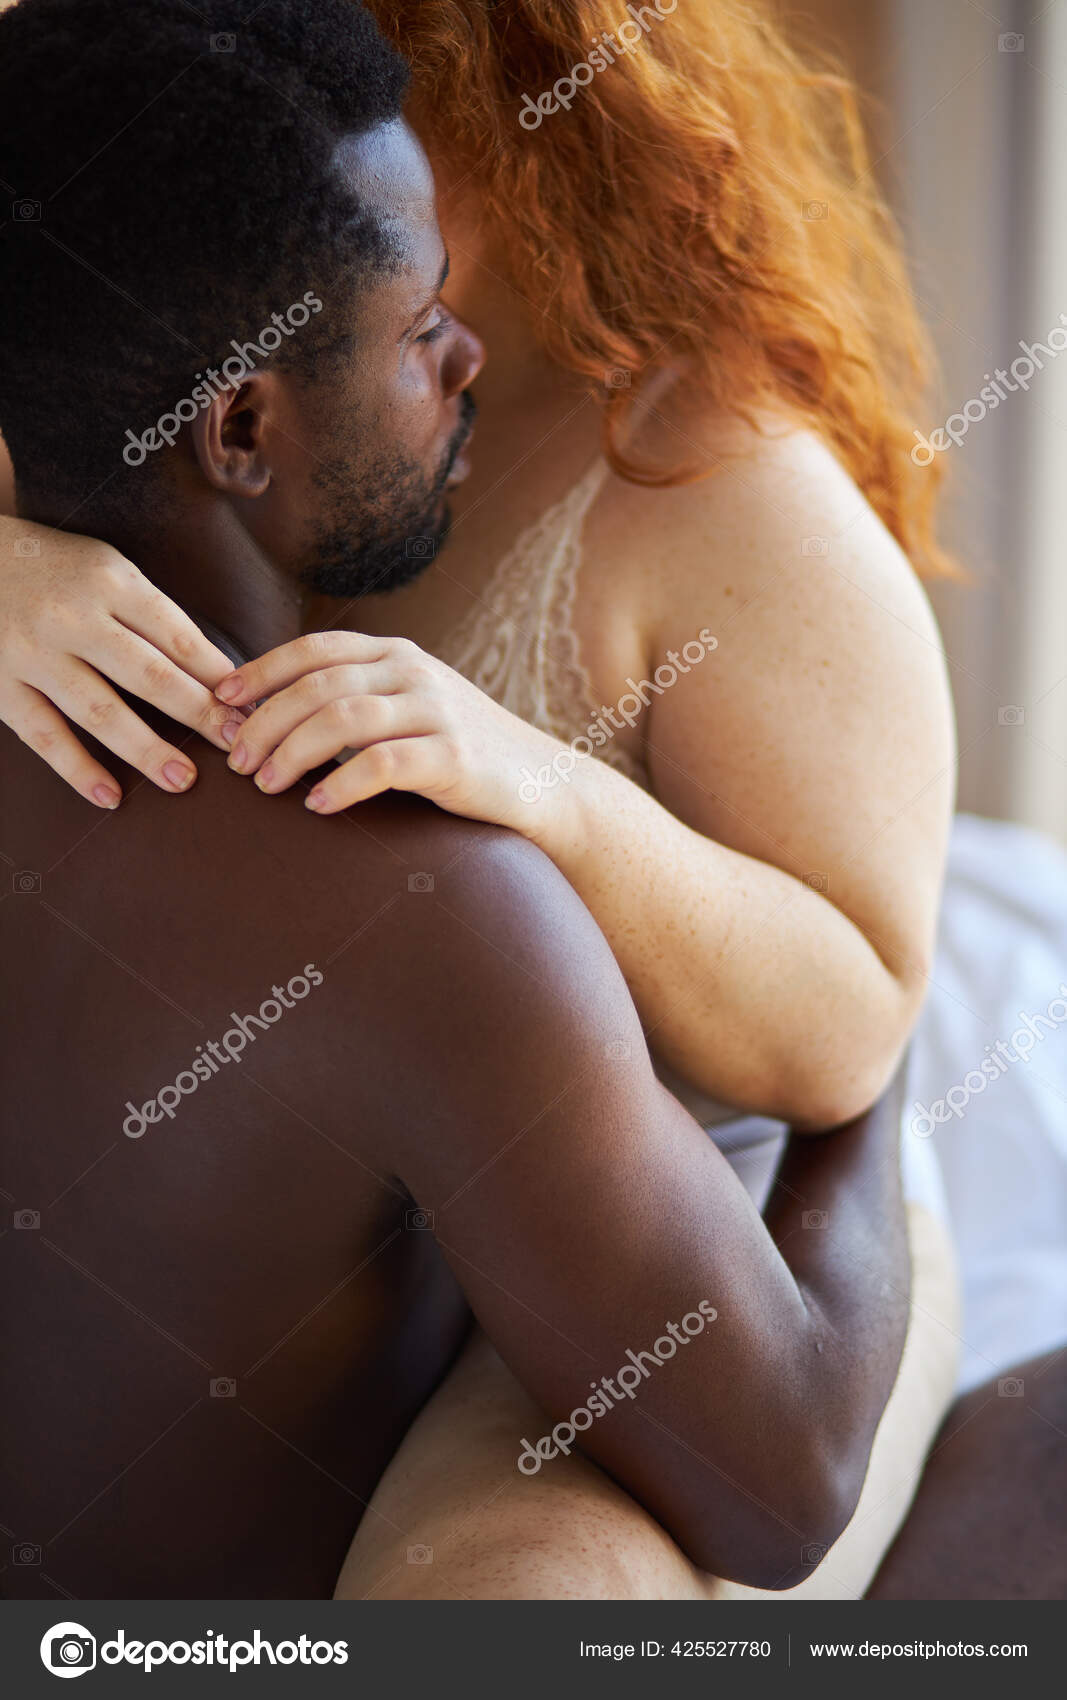 Passion between tender interracial diverse man and woman at home Stock Photo by ©romanchazov27 425527780